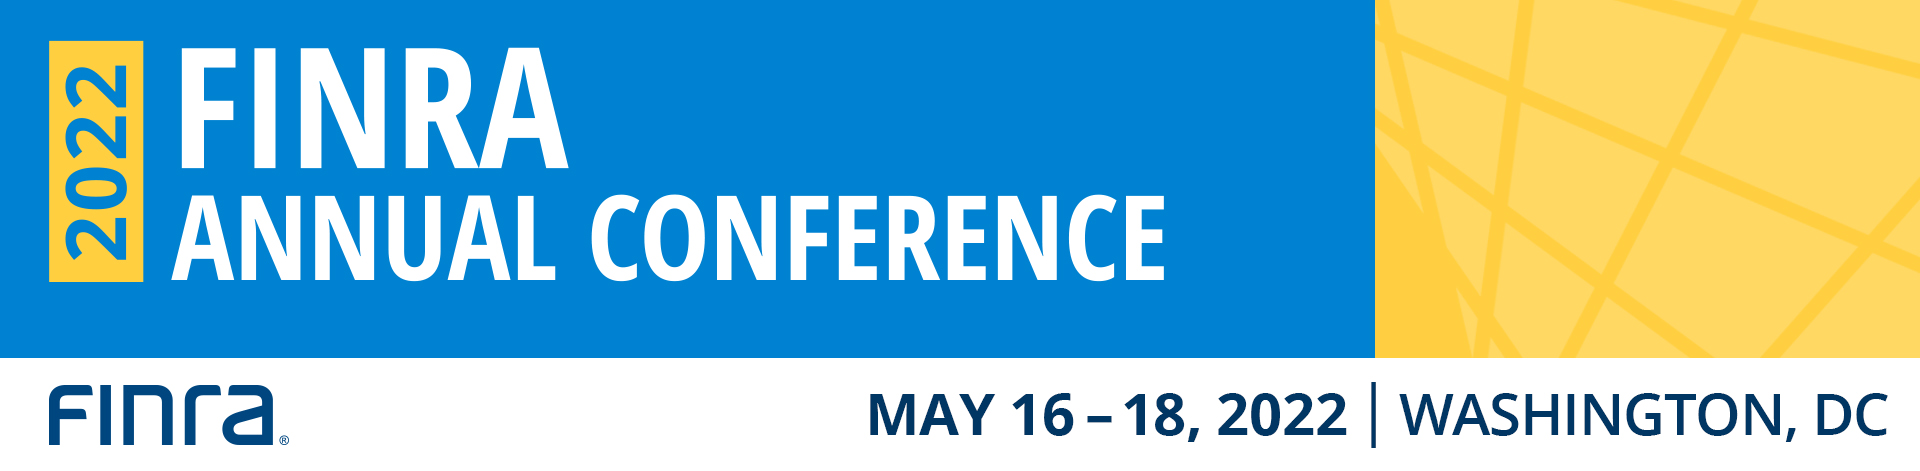 2022 FINRA Annual Conference | May 16-18 | Washington, DC